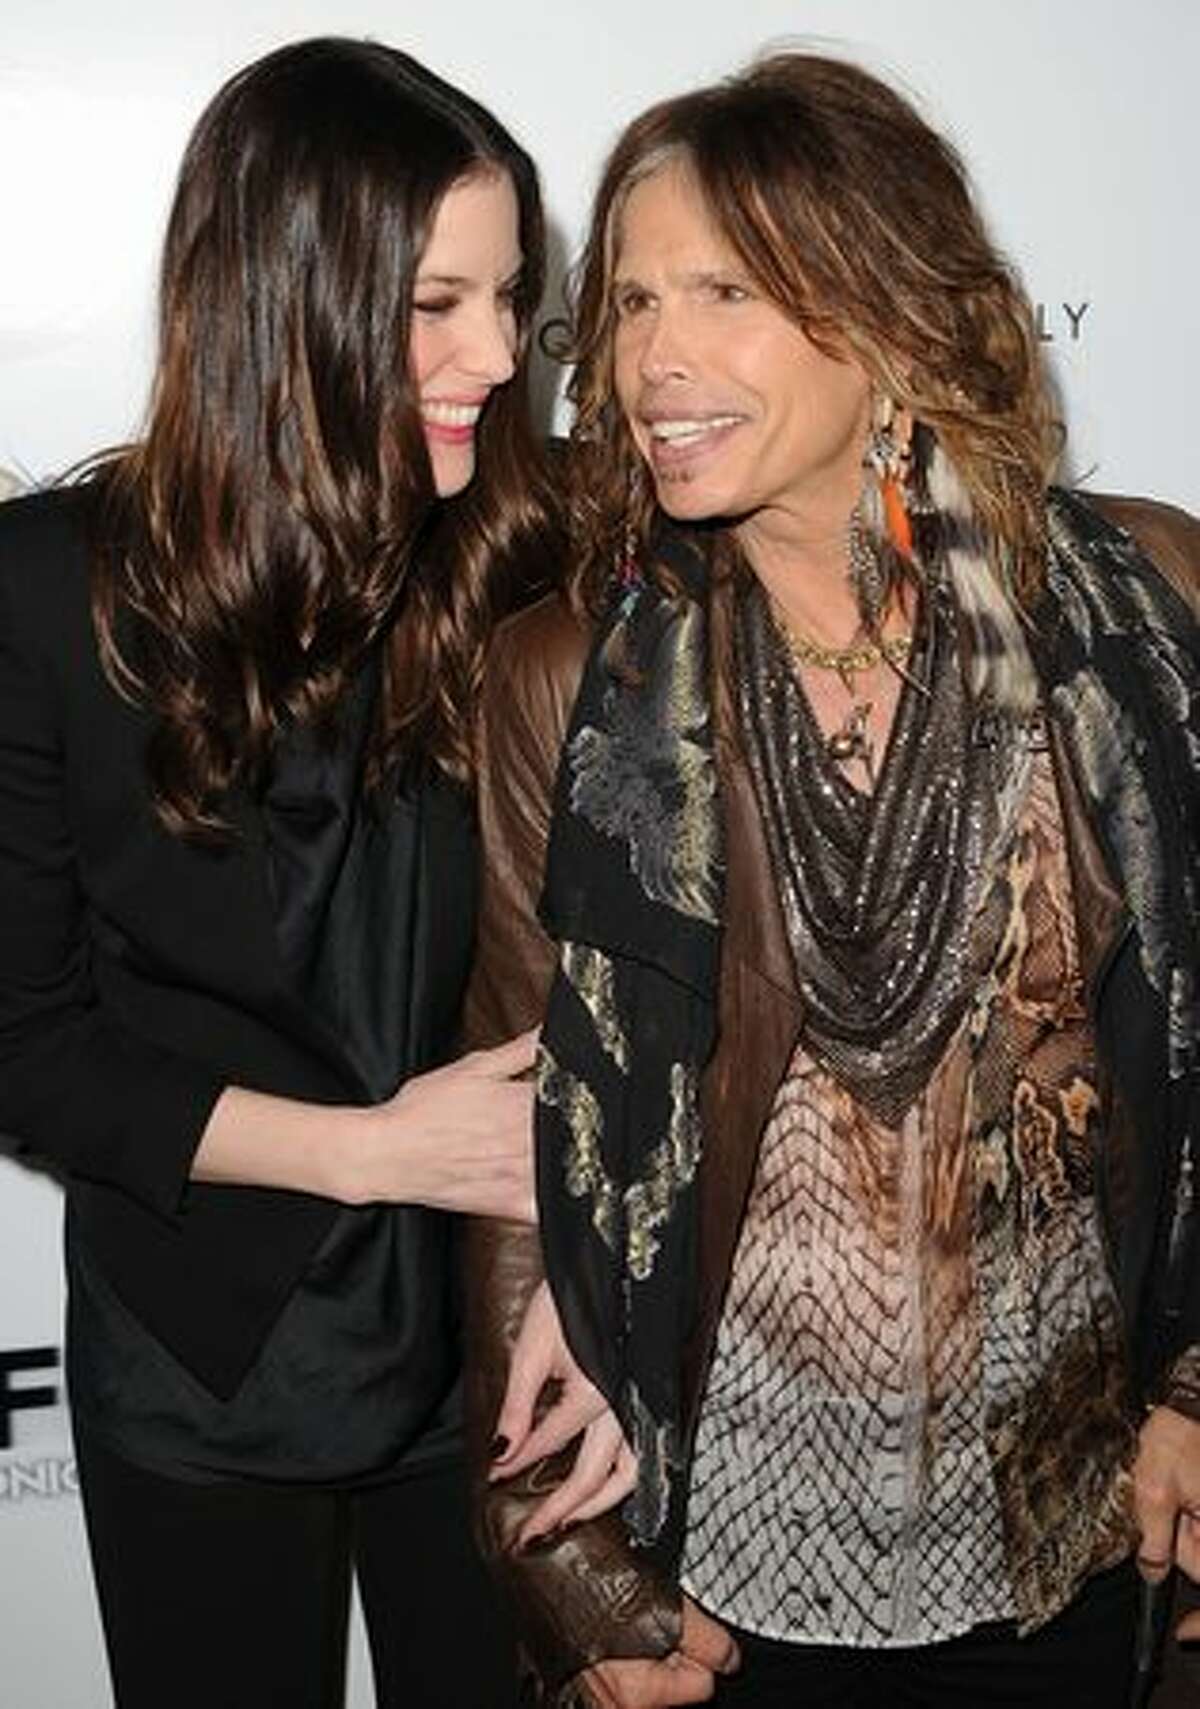 Actress Liv Tyler and singer Steven Tyler arrive at the premiere of IFC Midnight's 'Super' at the Egyptian Theatre in Hollywood, California.